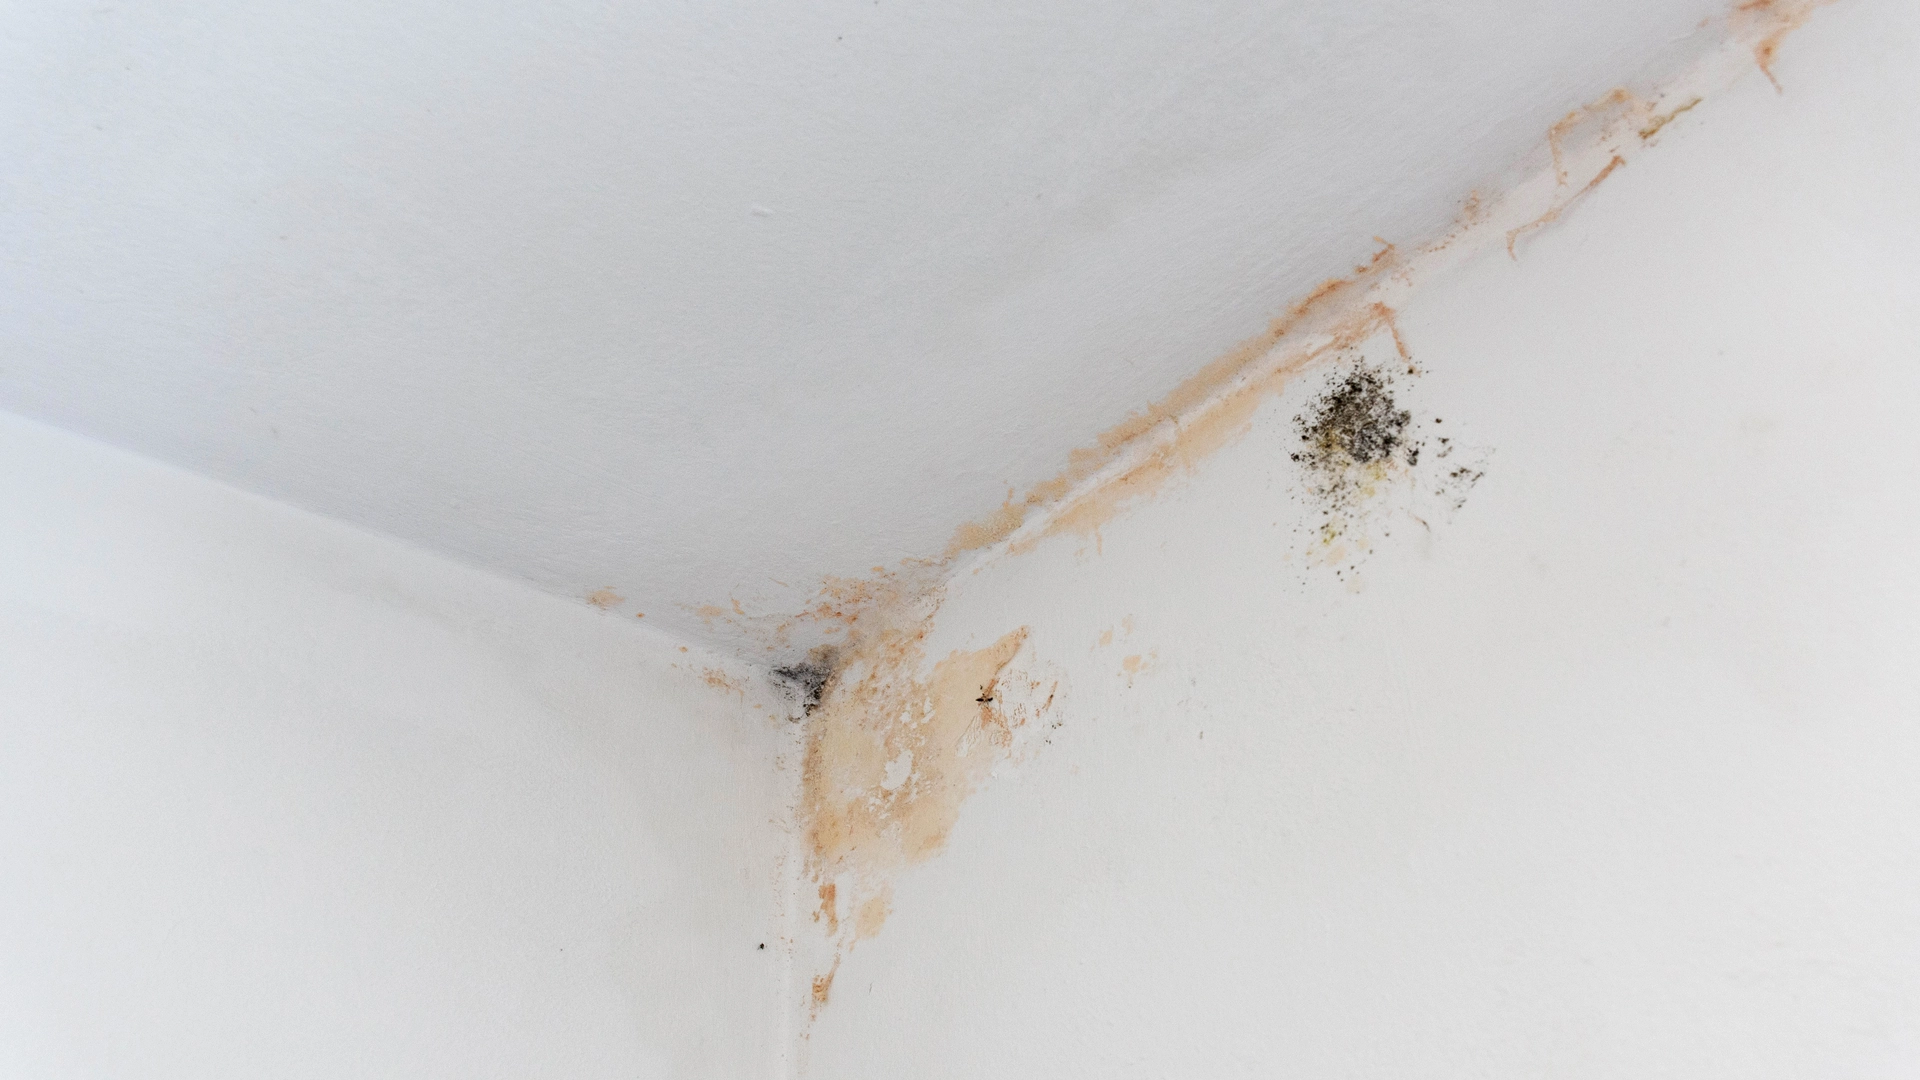 causes and how to Prevent Mold and Mildew in basement